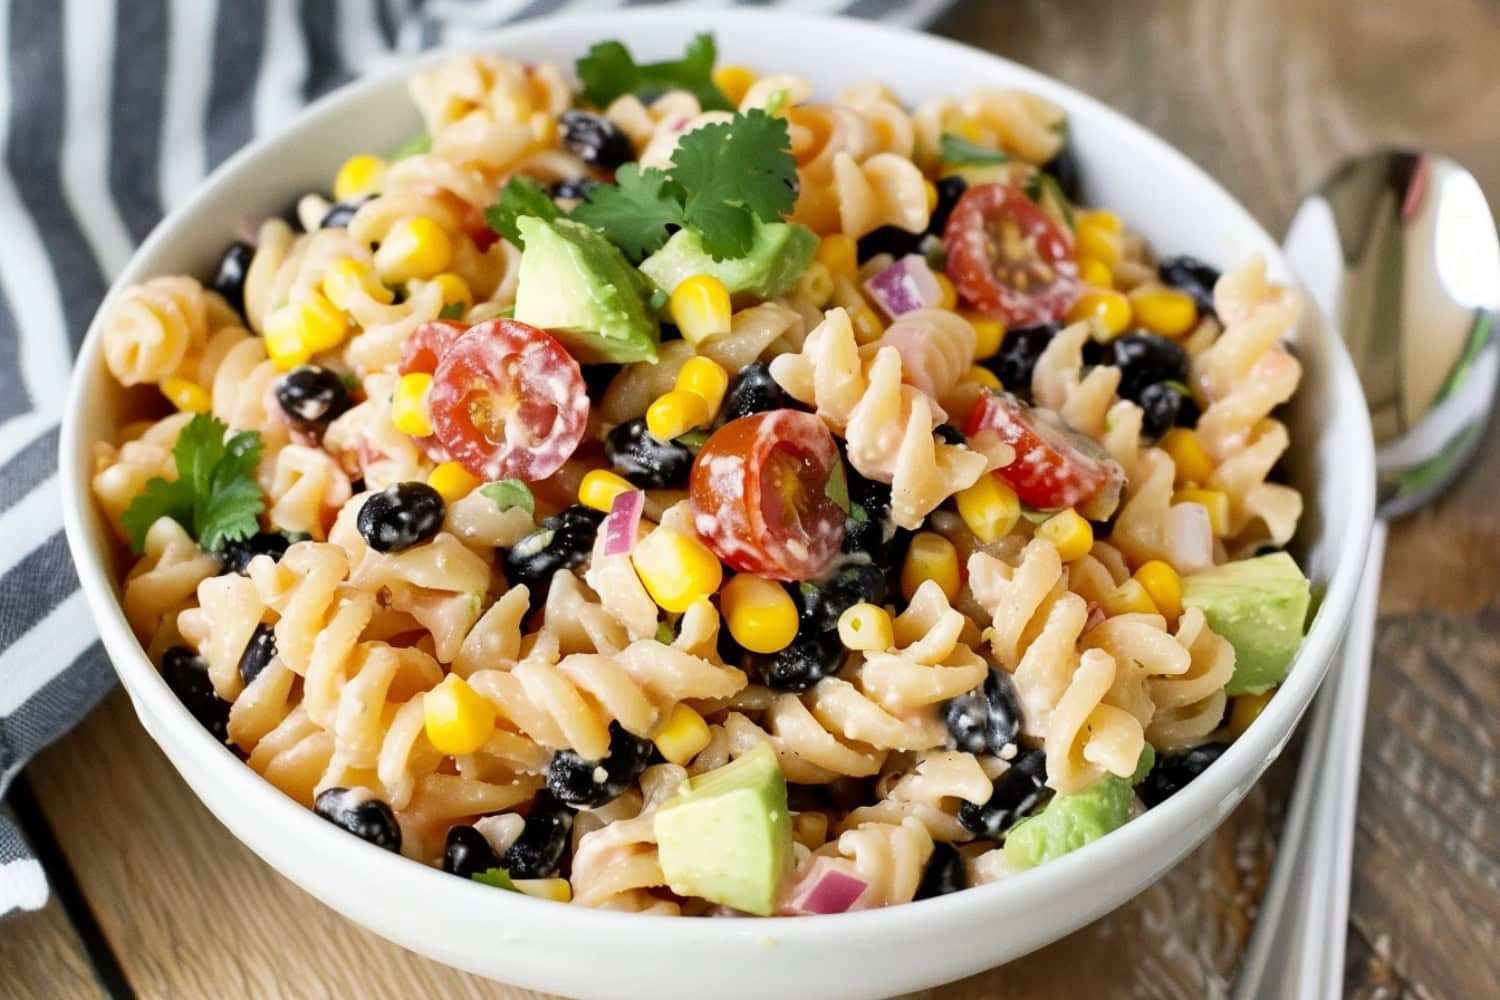 A festive presentation of Tex-Mex pasta salad in a large serving bowl, featuring black beans, corn, avocado and cherry tomatoes.